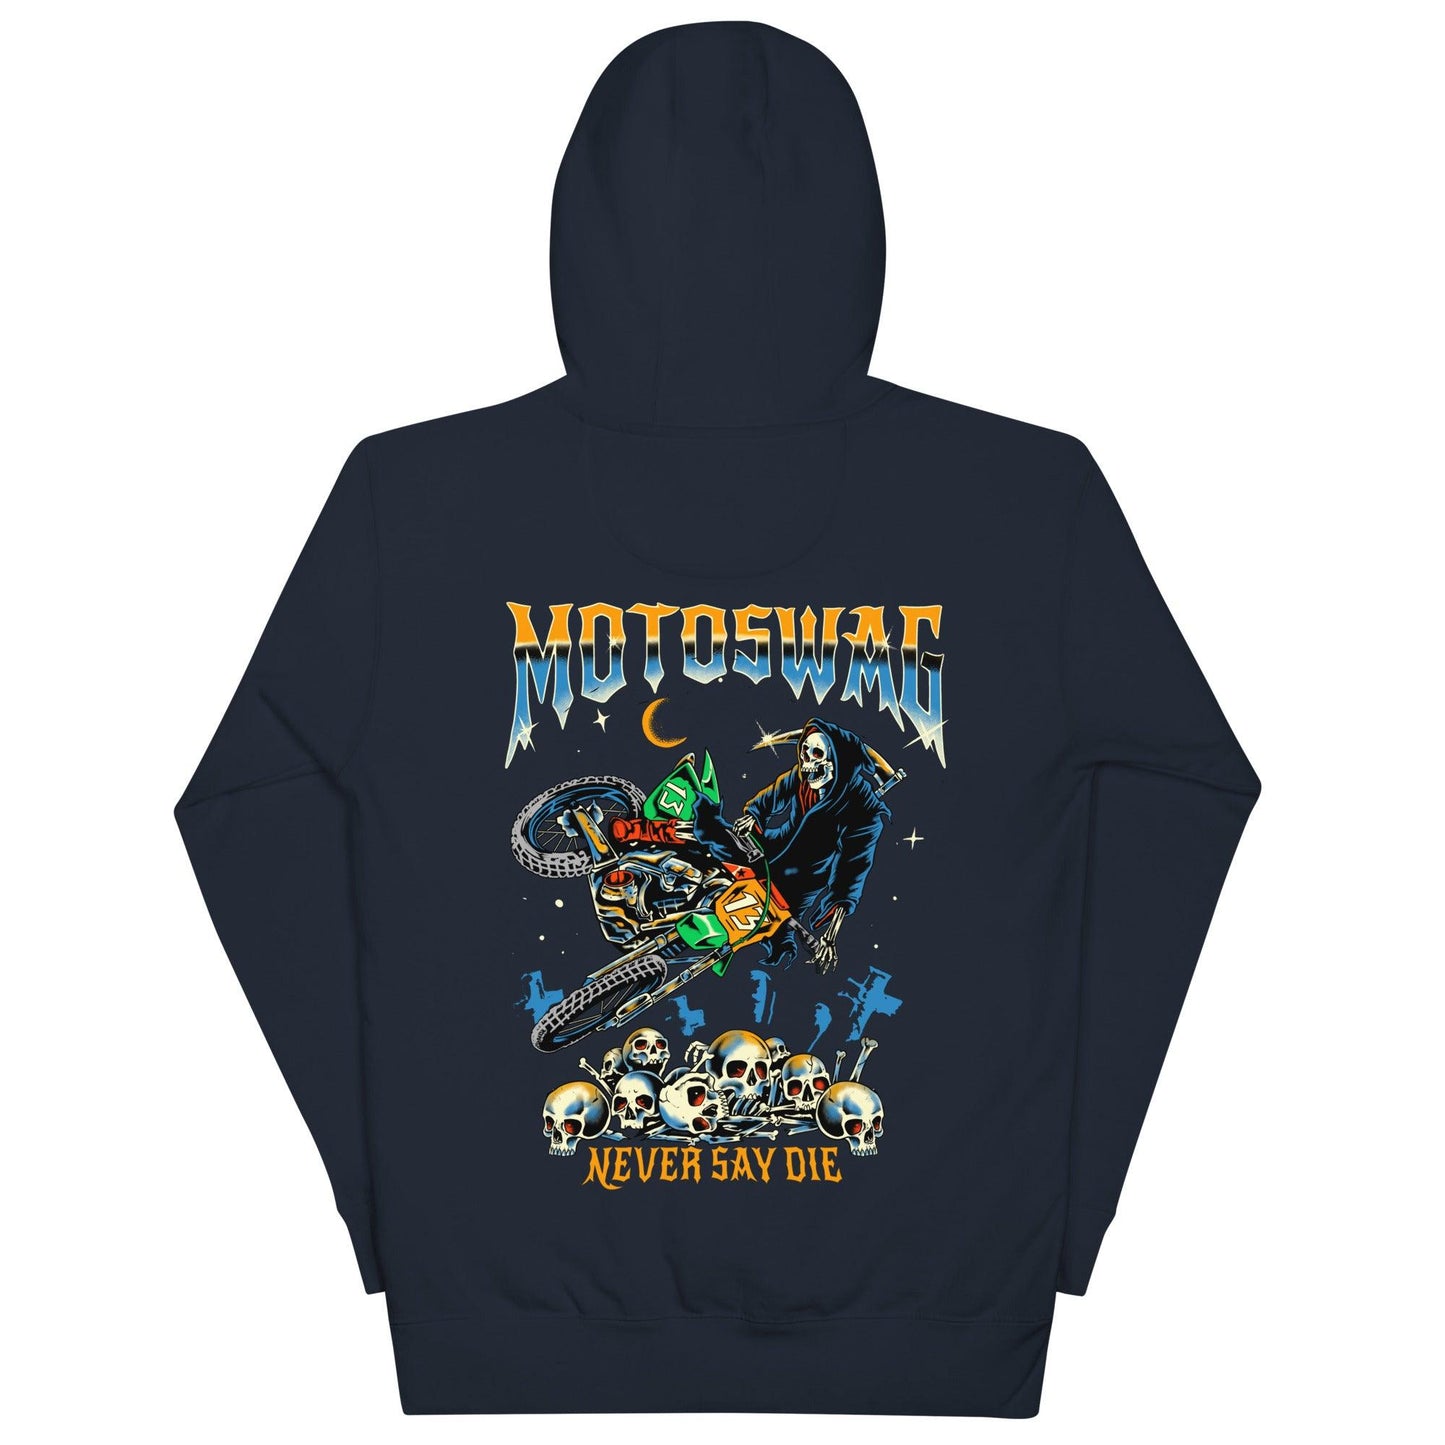 TATSWAG HOODIES   MotoSwag. ‘NEVER SAY DIE’ - TatSwag Art Collective  tattoo t-shirts  tattoo clothing